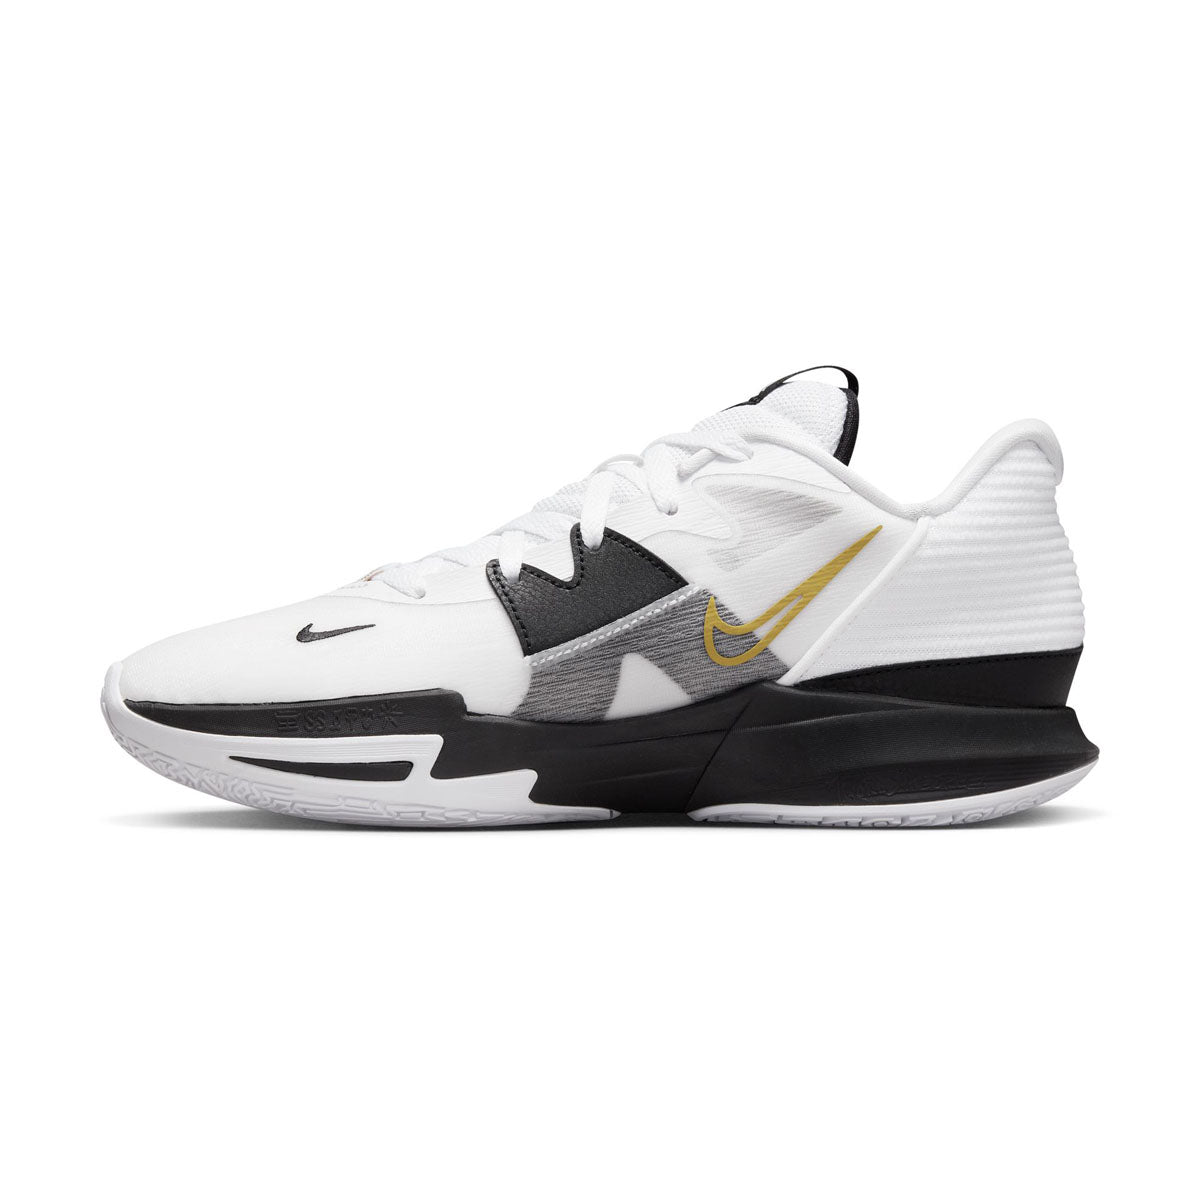 Kyrie Low 5 Basketball Shoes